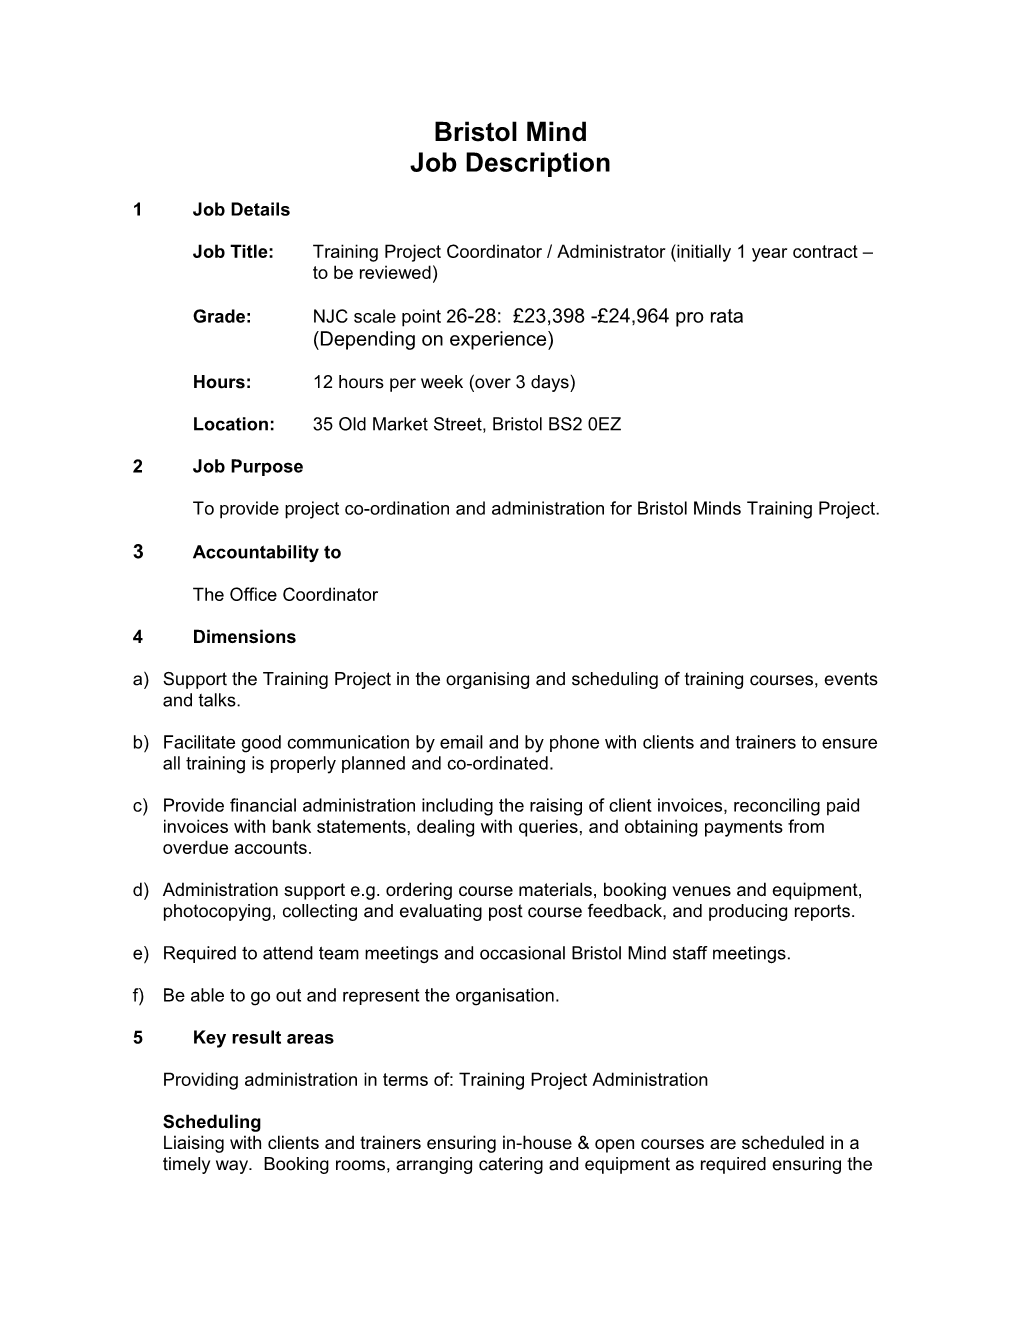 Job Title:Training Projectcoordinator / Administrator (Initially 1 Year Contract to Be Reviewed)